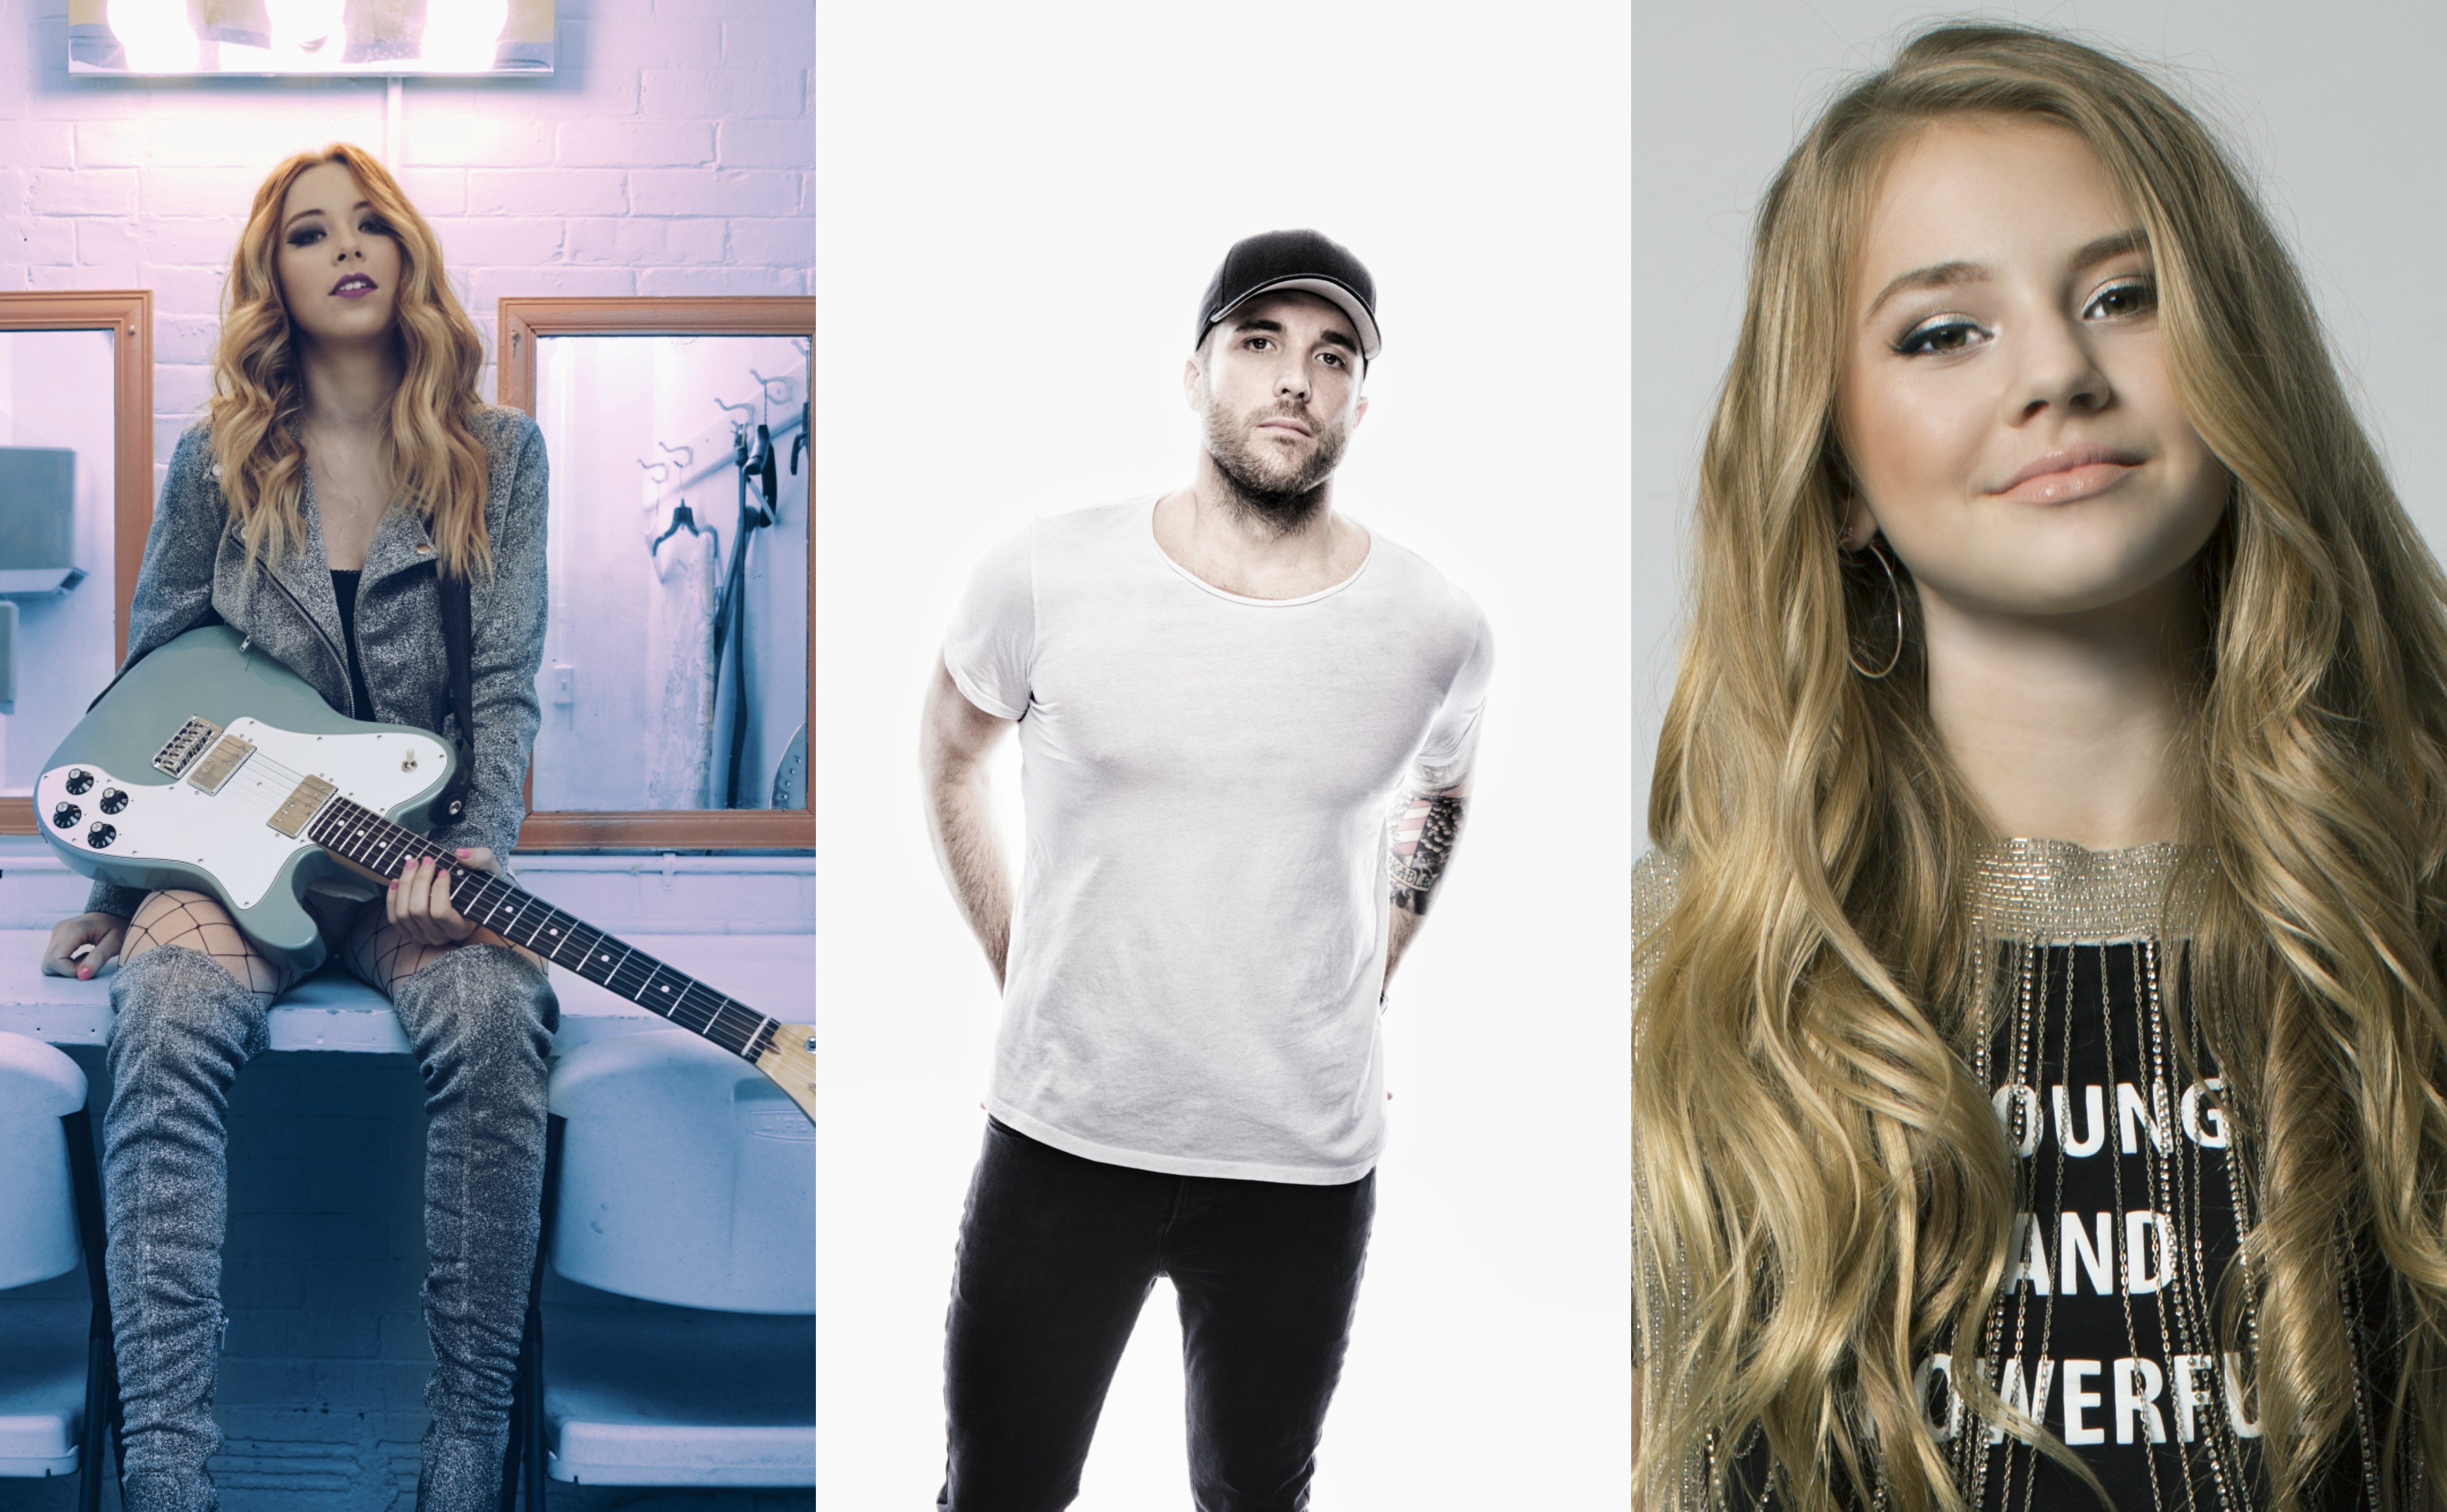 Kalie Shorr, Tegan Marie, Temecula Road, Levi Hummon, Tyler Rich & More Added to CMA Fest 2018 Lineup